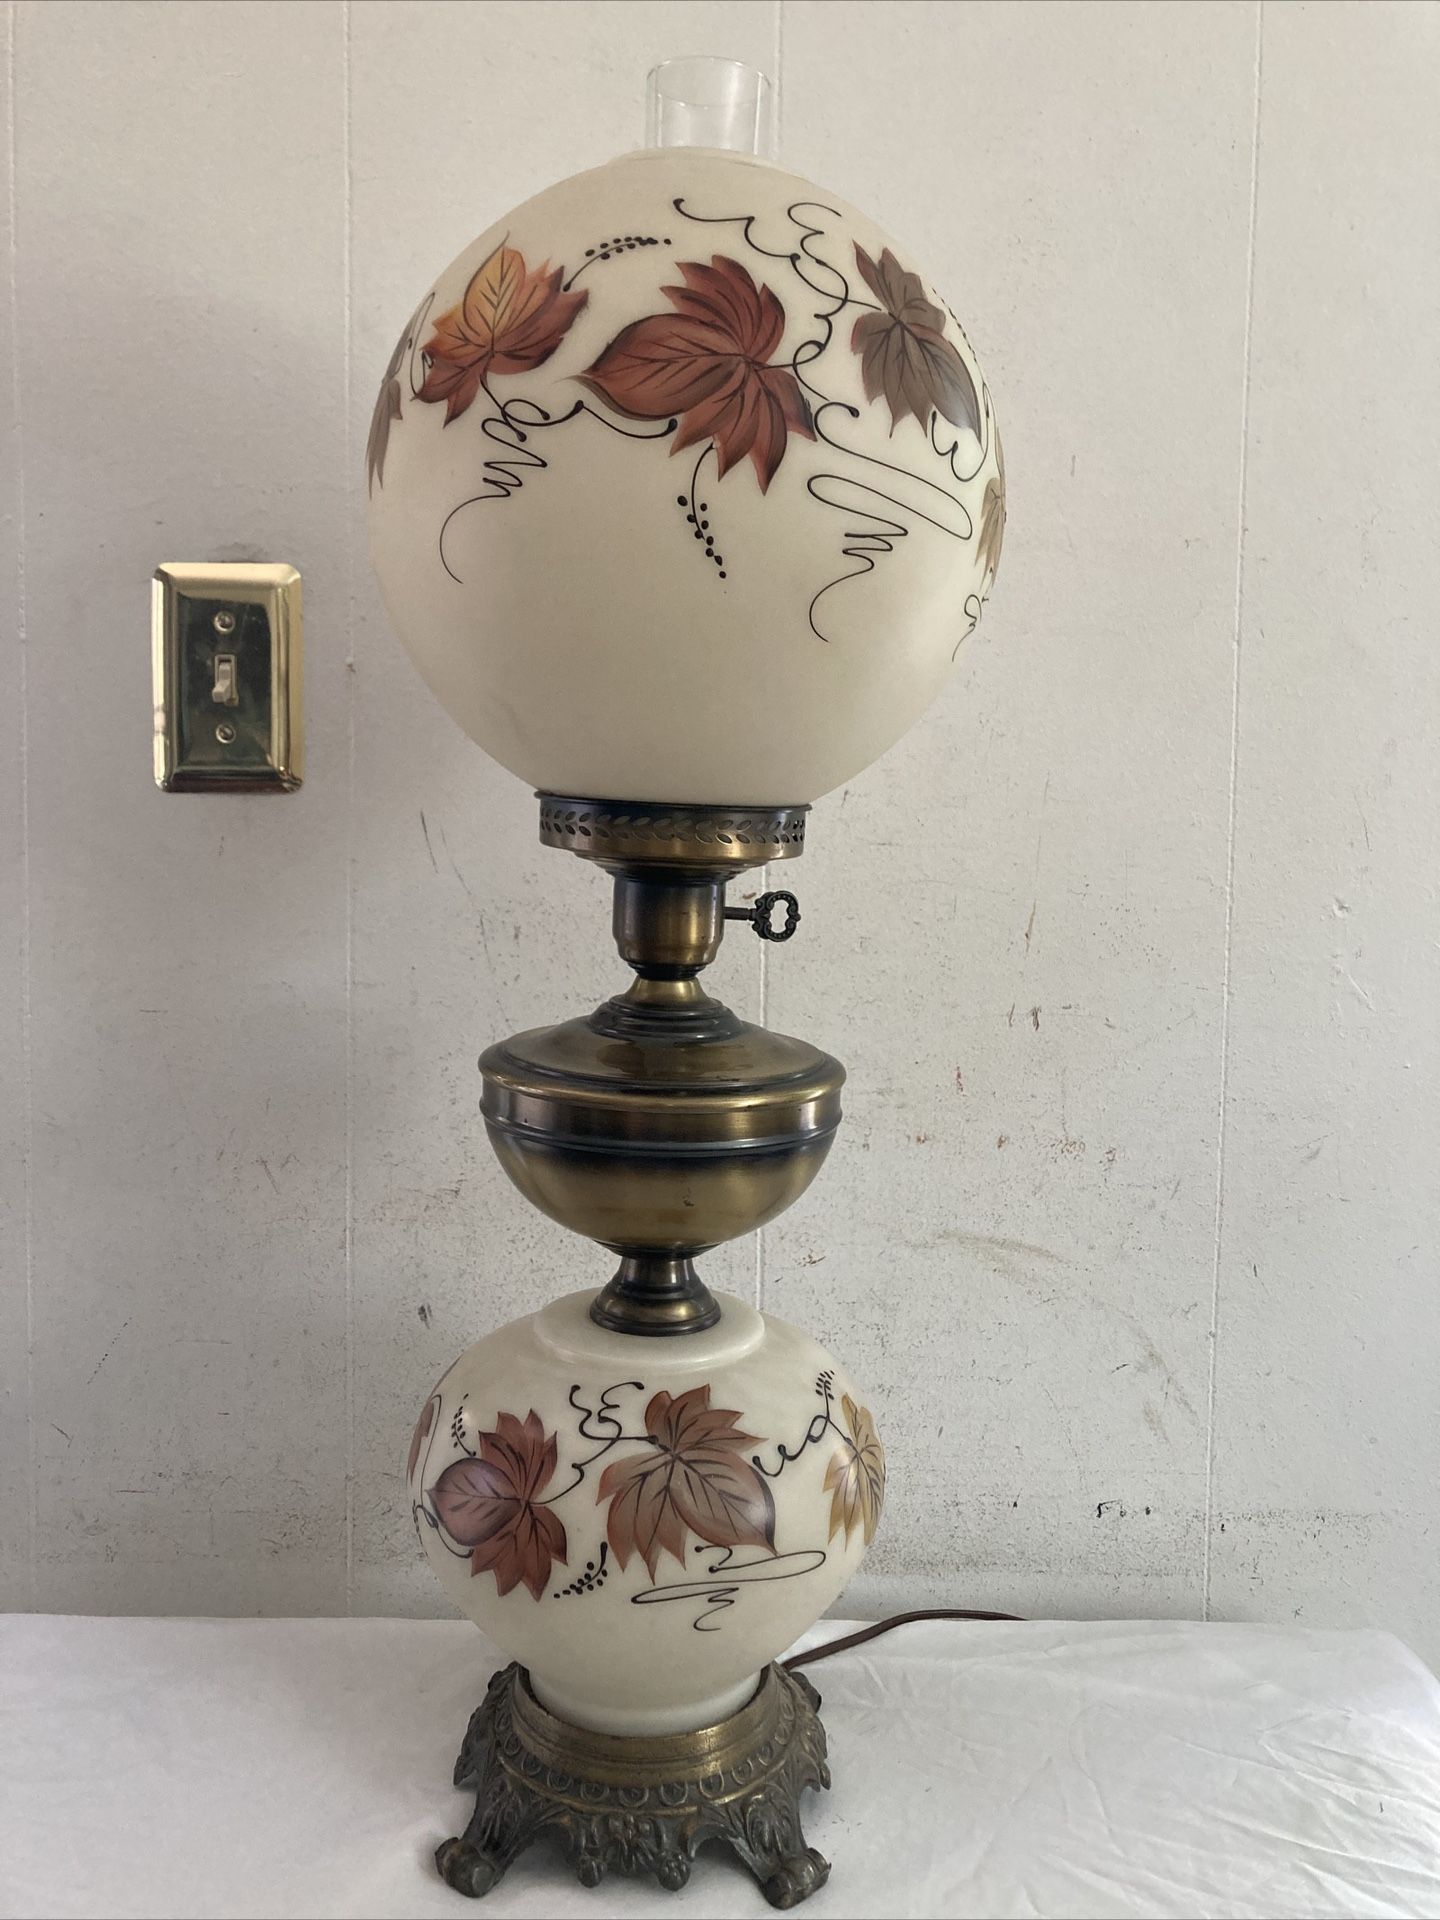 Vintage Gone With The Wind 3-Way Lamp 27”